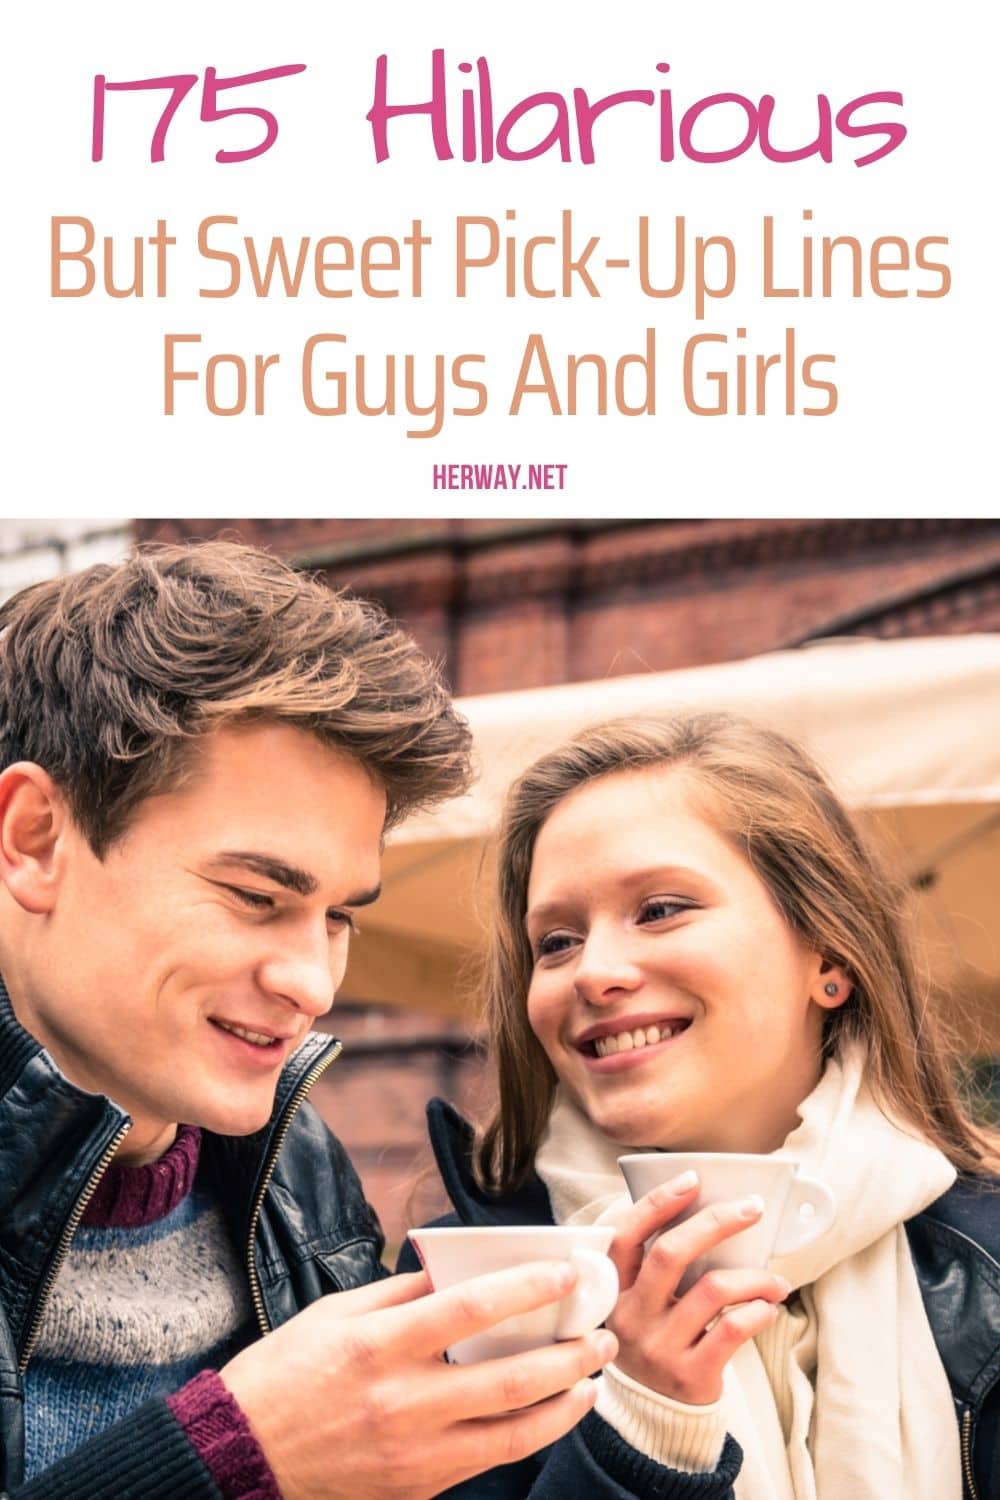 175 Hilarious But Sweet Pick-Up Lines For Guys And Girls